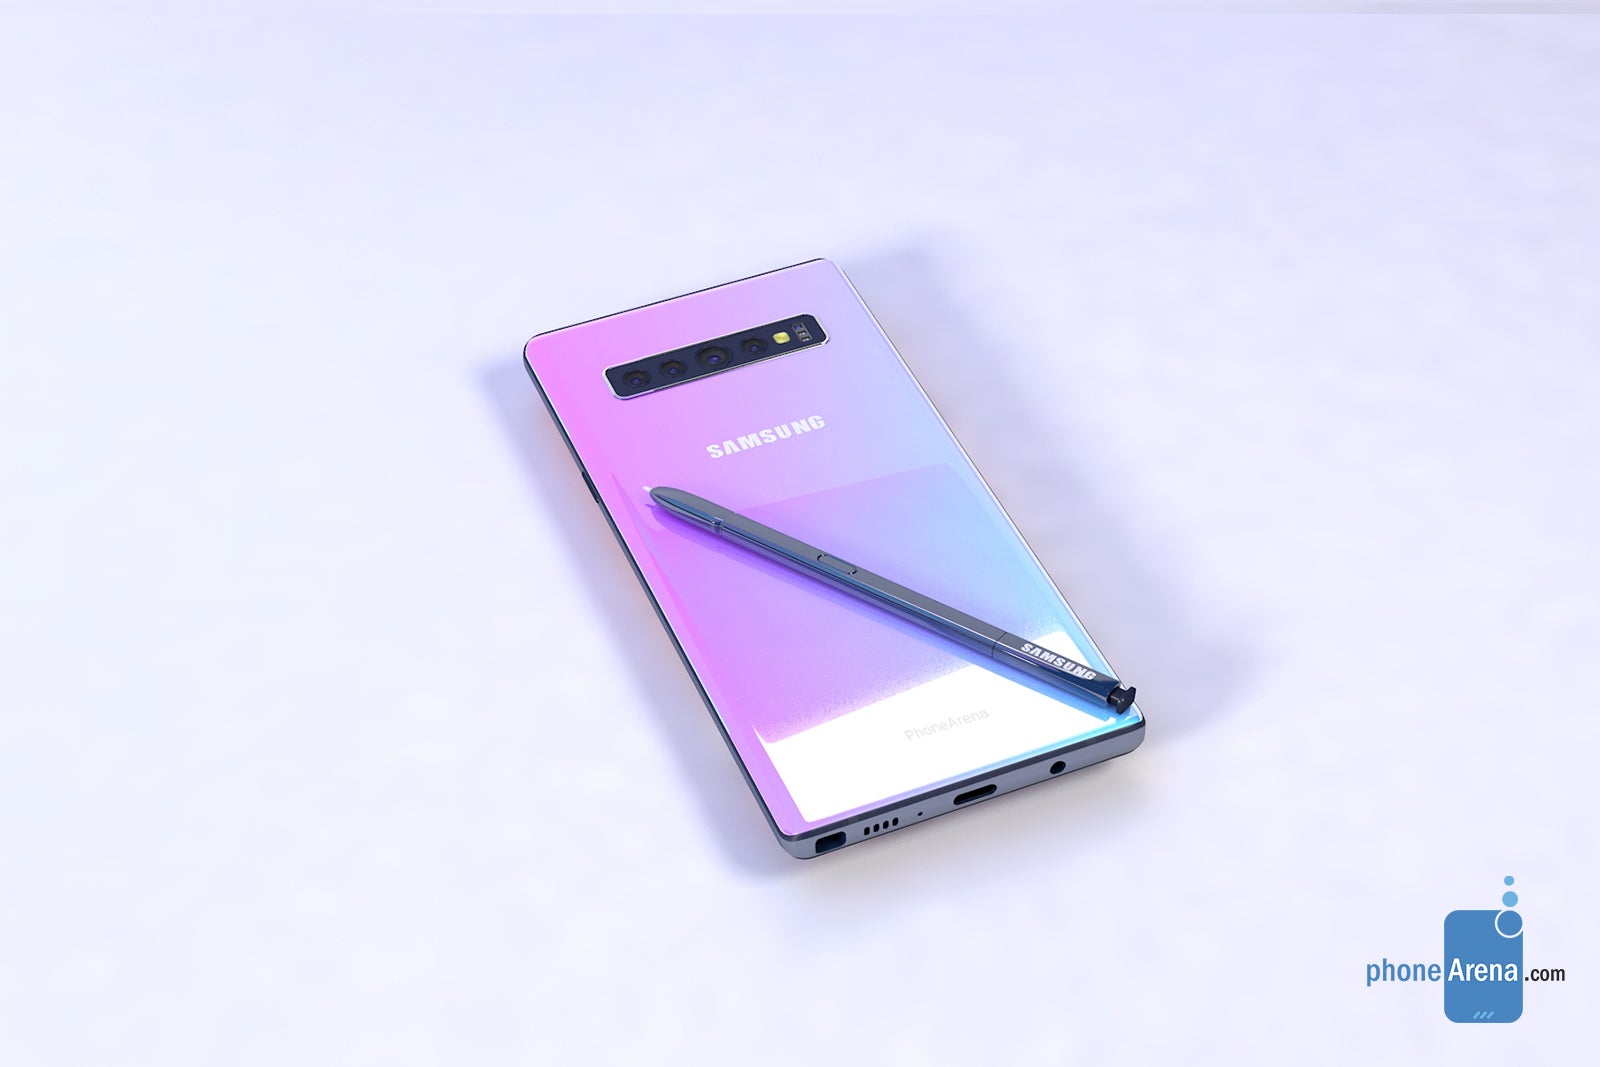 Galaxy Note 10+ render based on leaked information - The Galaxy Note 10+ has been accidentally confirmed by Samsung, 256 GB and 512 GB variants spotted